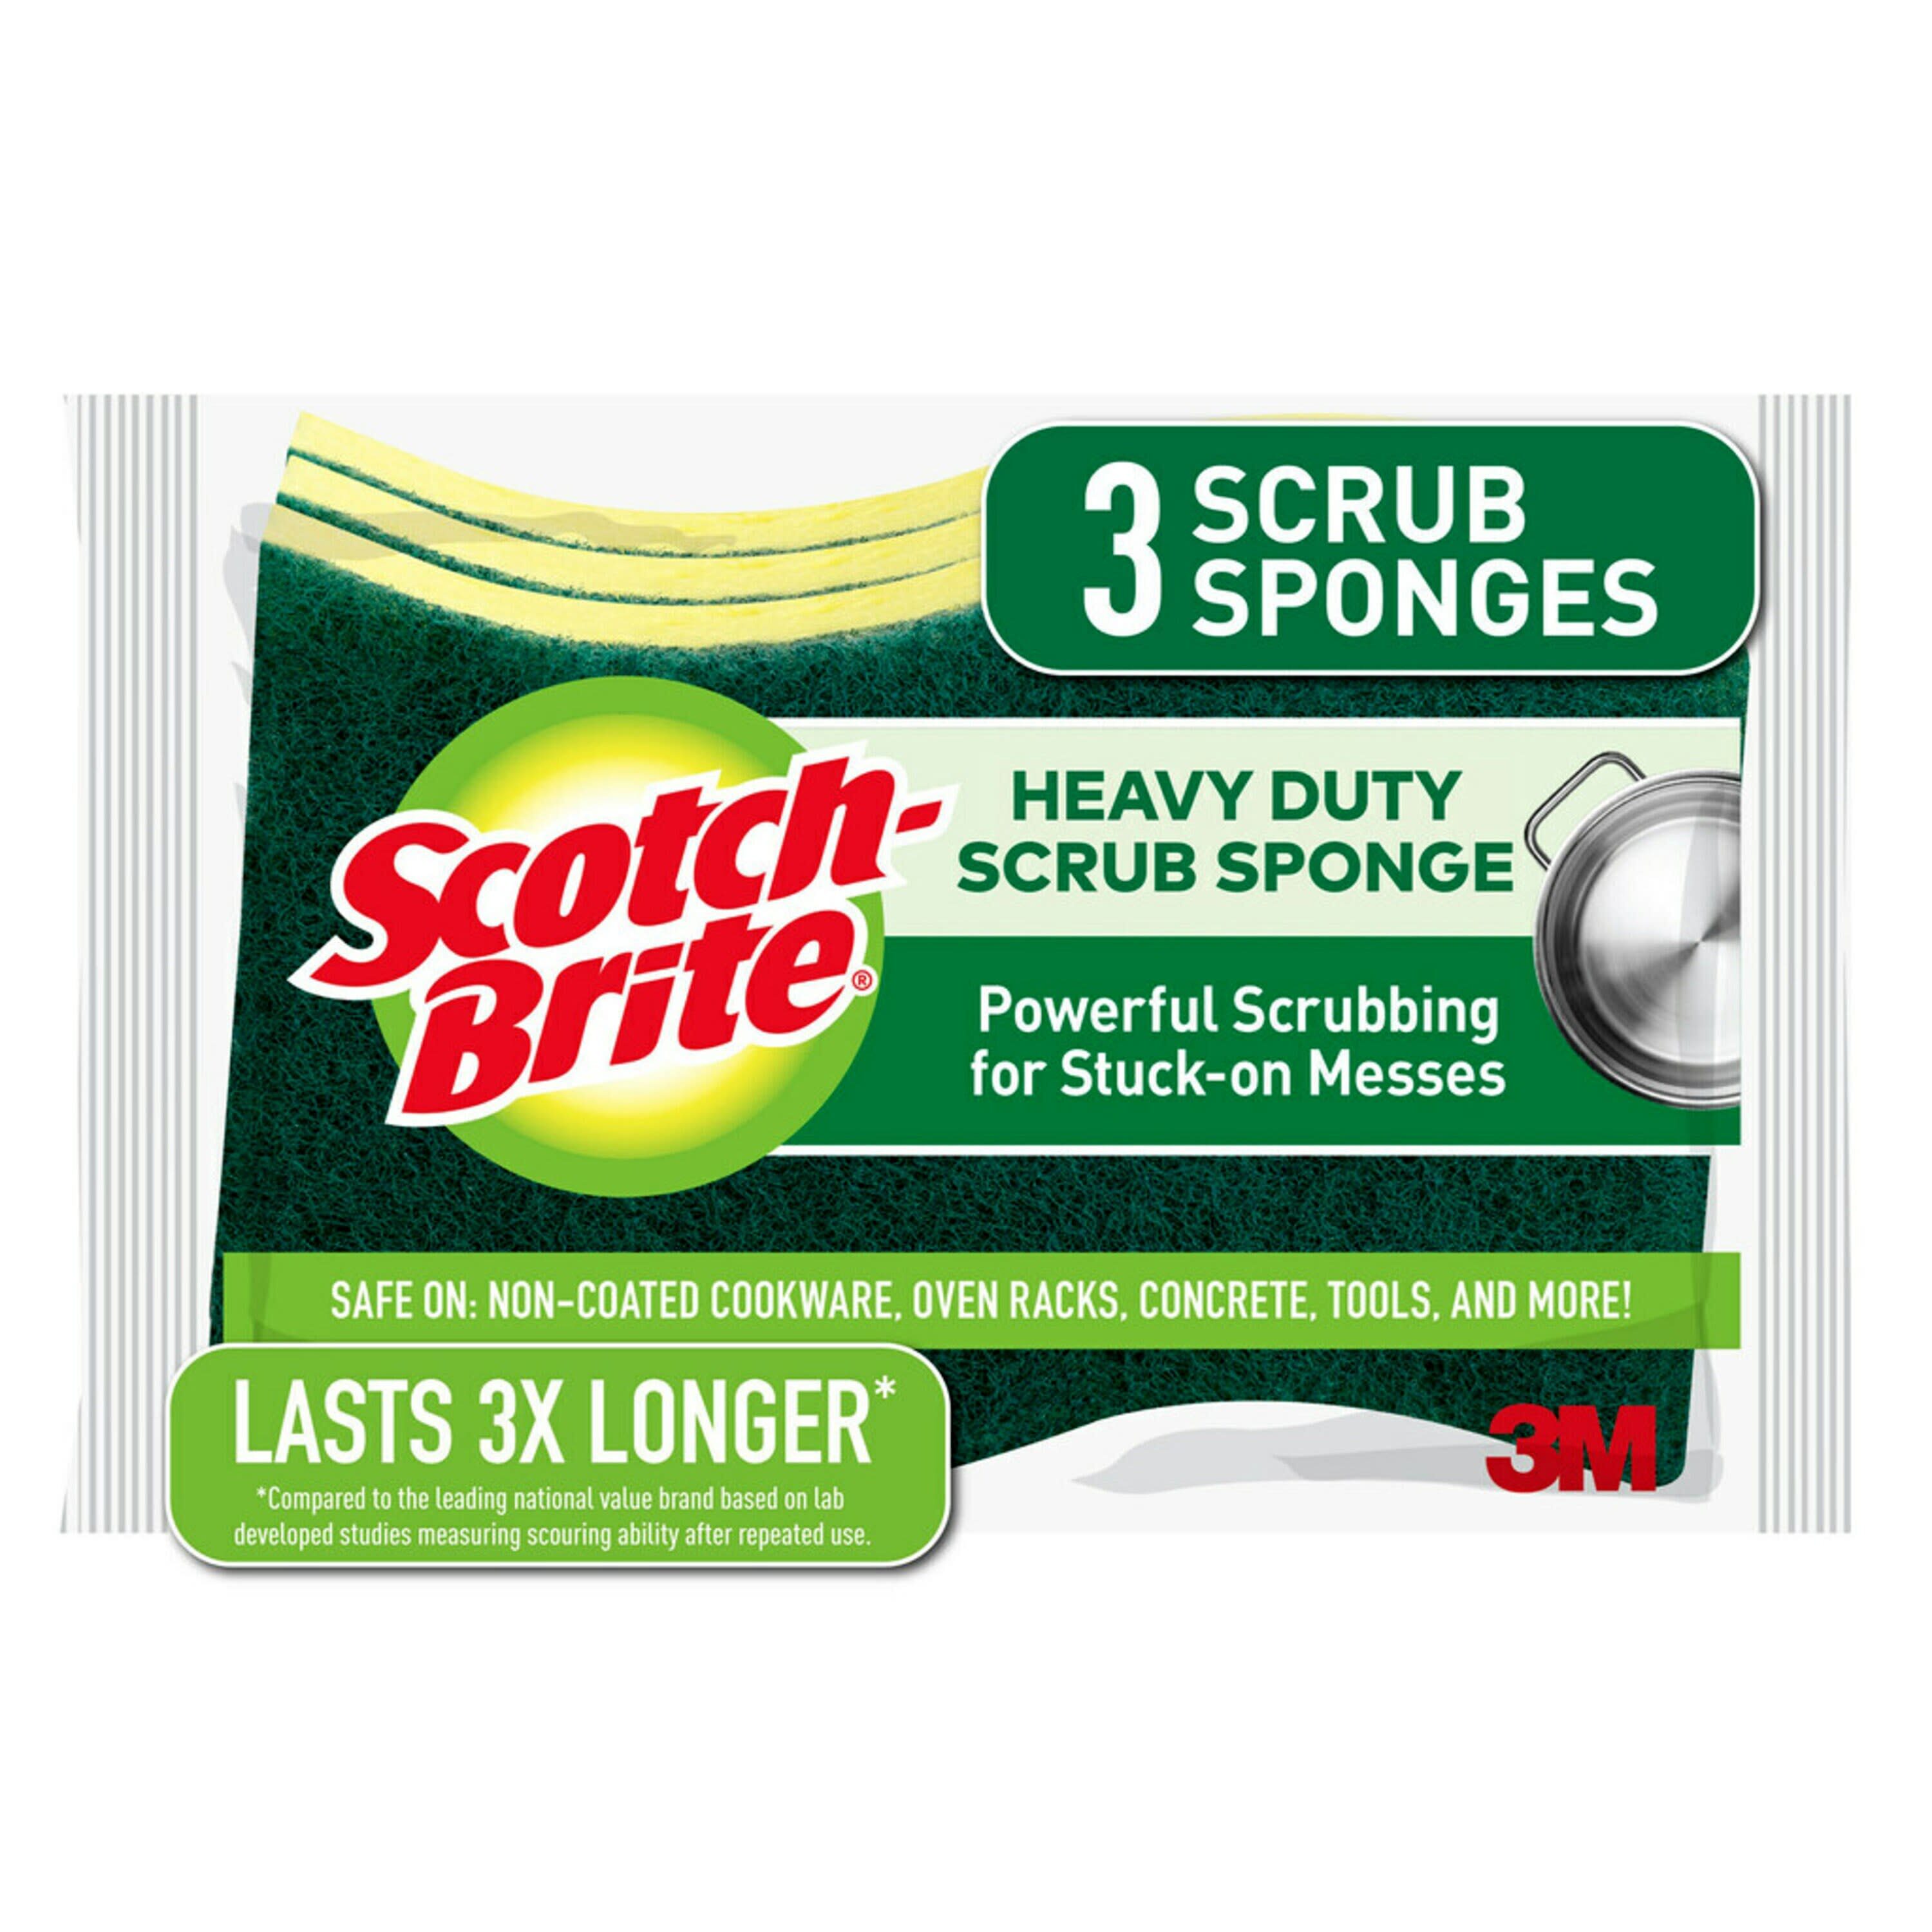 Sponges & Scouring Pads at